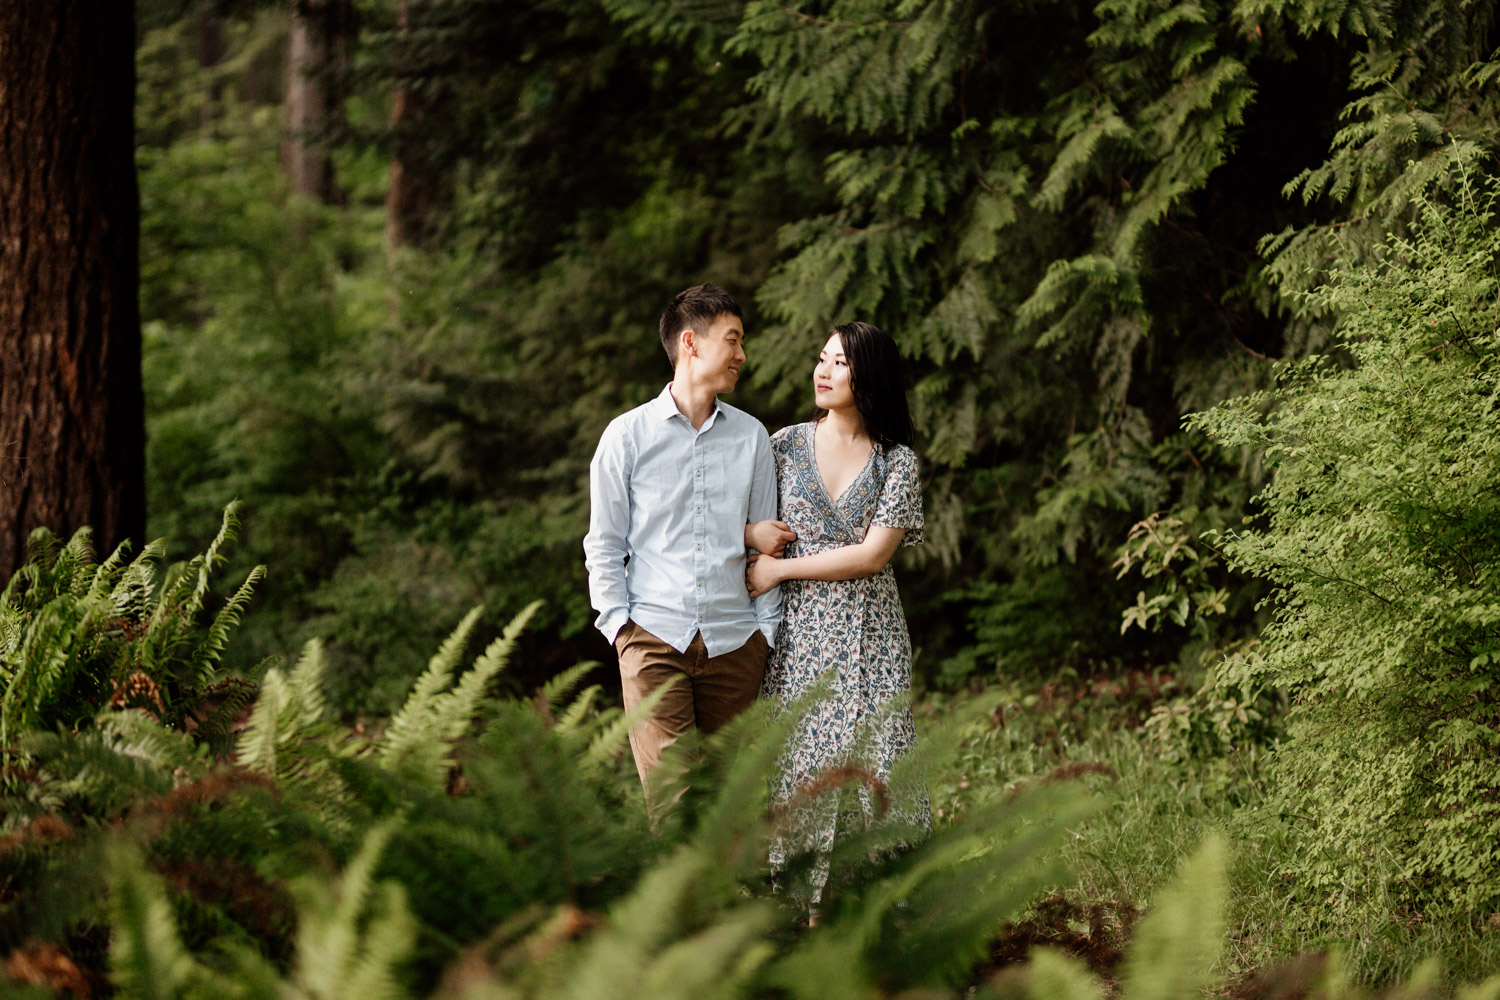 stanley park engagement photography in vancouver bc during sunset or golden hour at rose garden